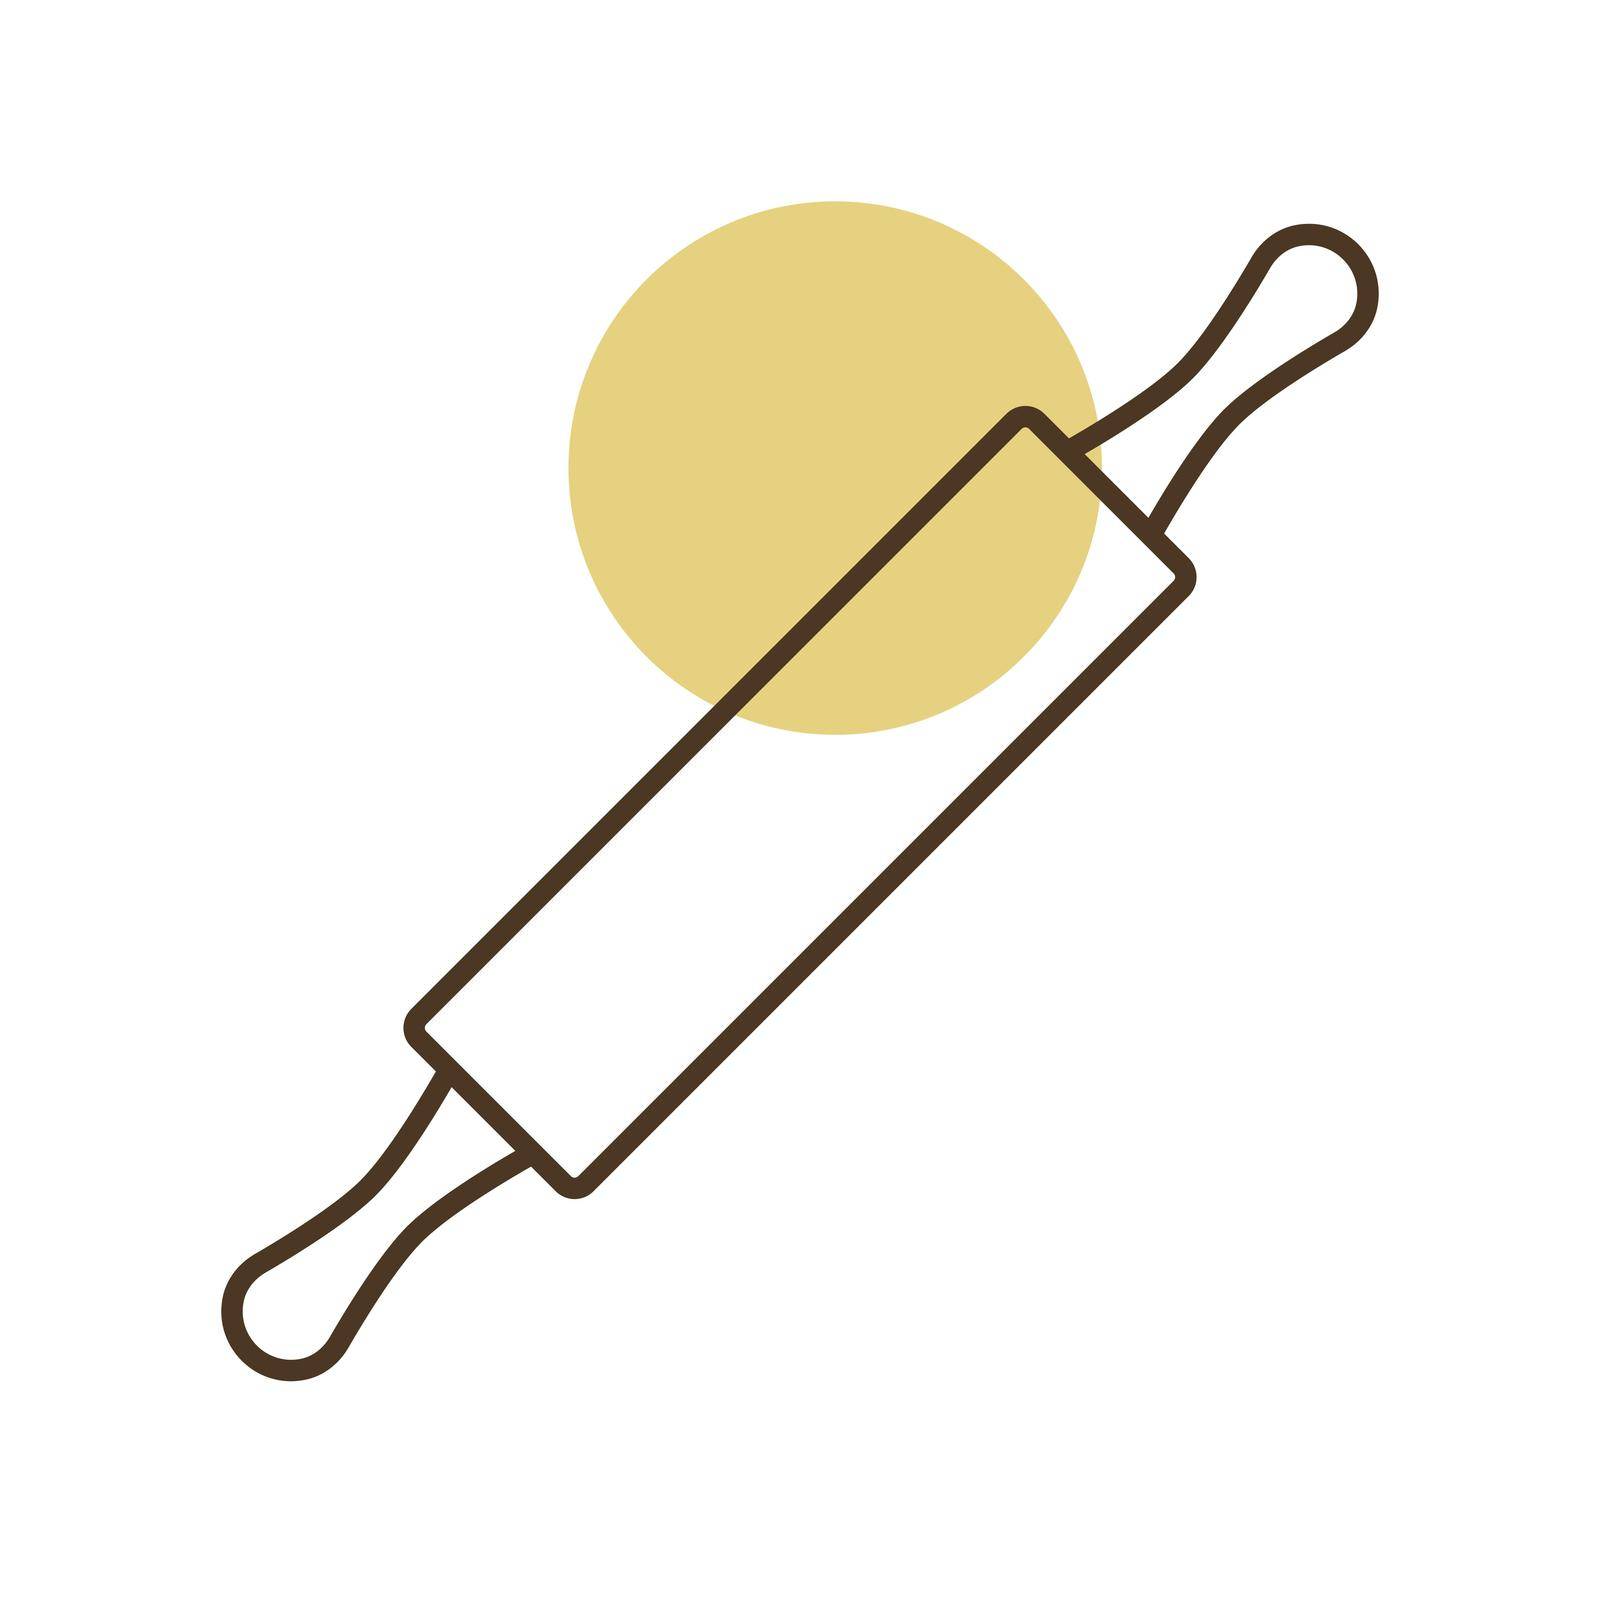 Wooden rolling pin plunger vector icon. Kitchen appliance. Graph symbol for cooking web site design, logo, app, UI